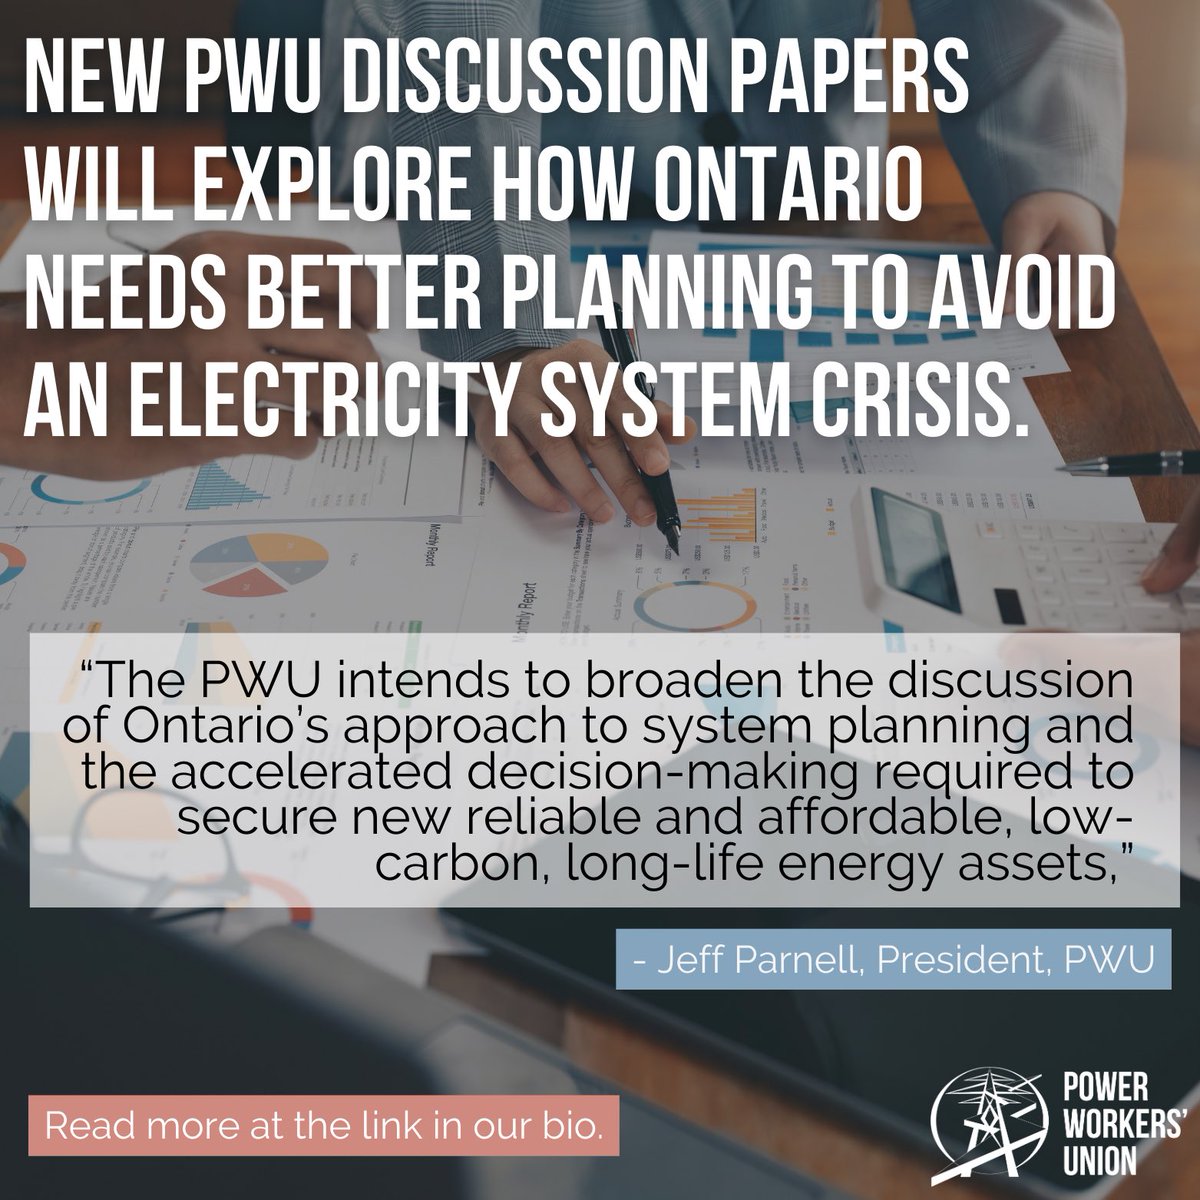 A new discussion paper was released today by the PWU conversation on better ways for Ontario to meet its growing electricity demand in a lower cost, lower carbon, and more reliable, affordable and timely manner. Read more at the link in our bio! 🔗 #PWUConnects